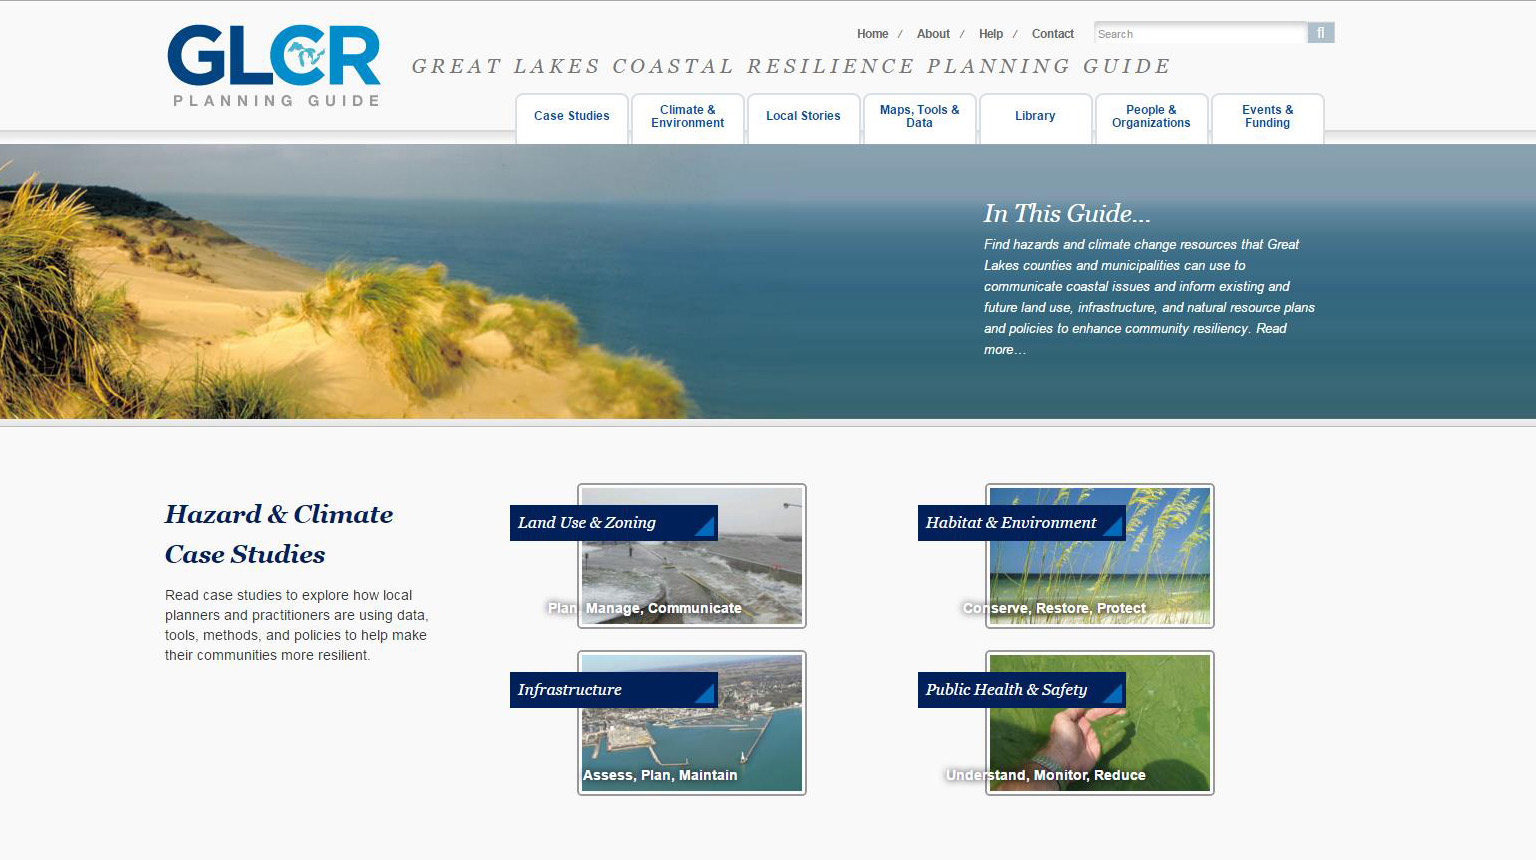 Great Lakes Coastal Resilience Planning Guide